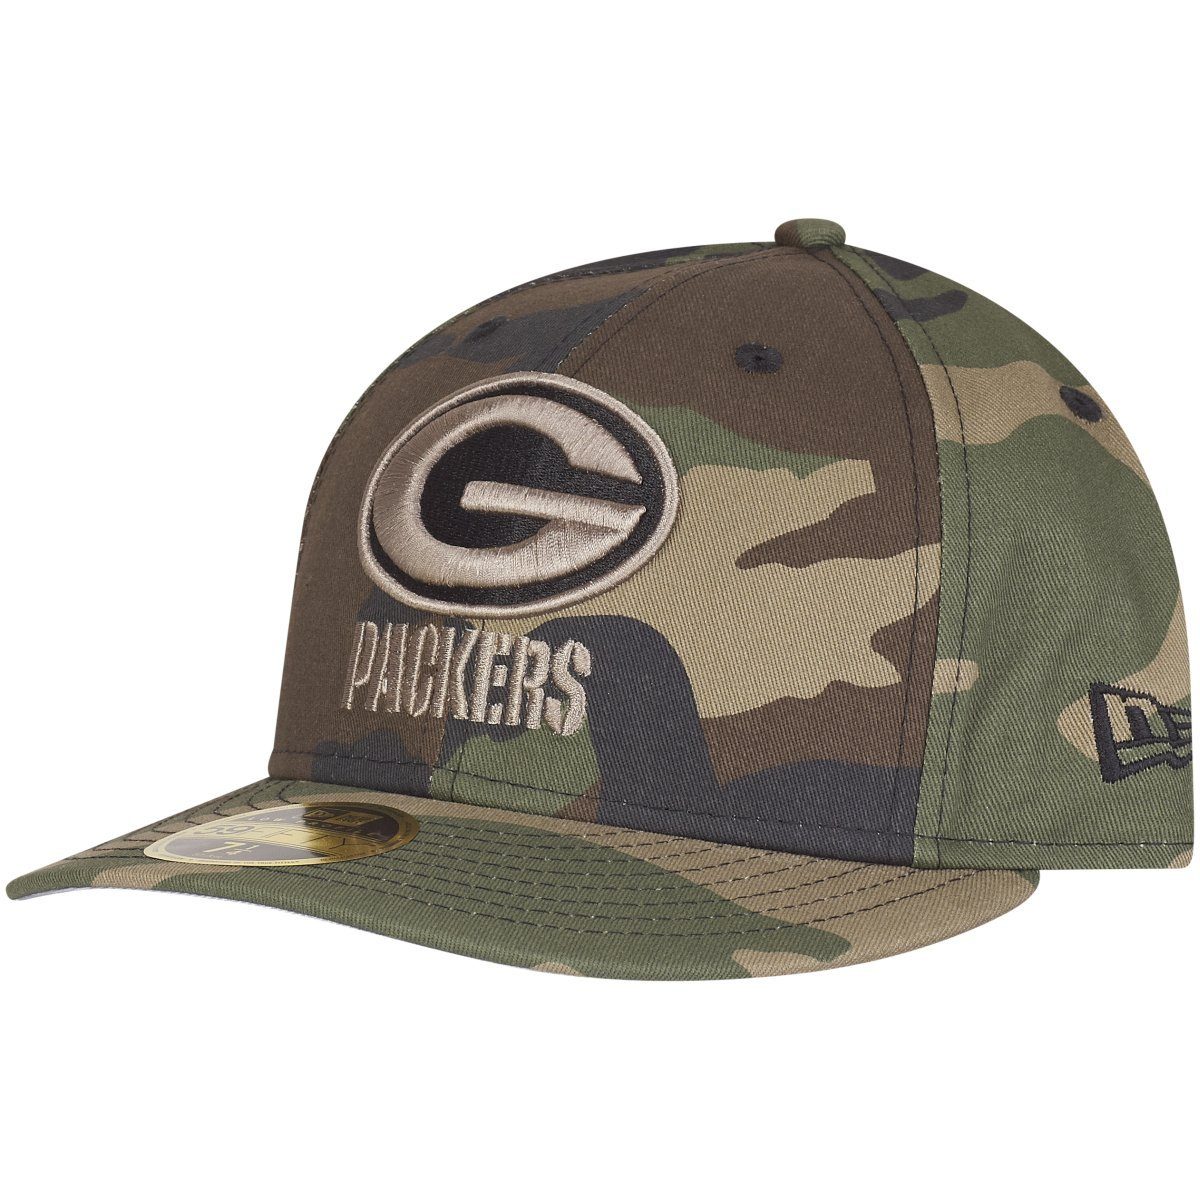 Low Bay New Cap Green 59Fifty Packers Era Profile Fitted Teams woodland NFL